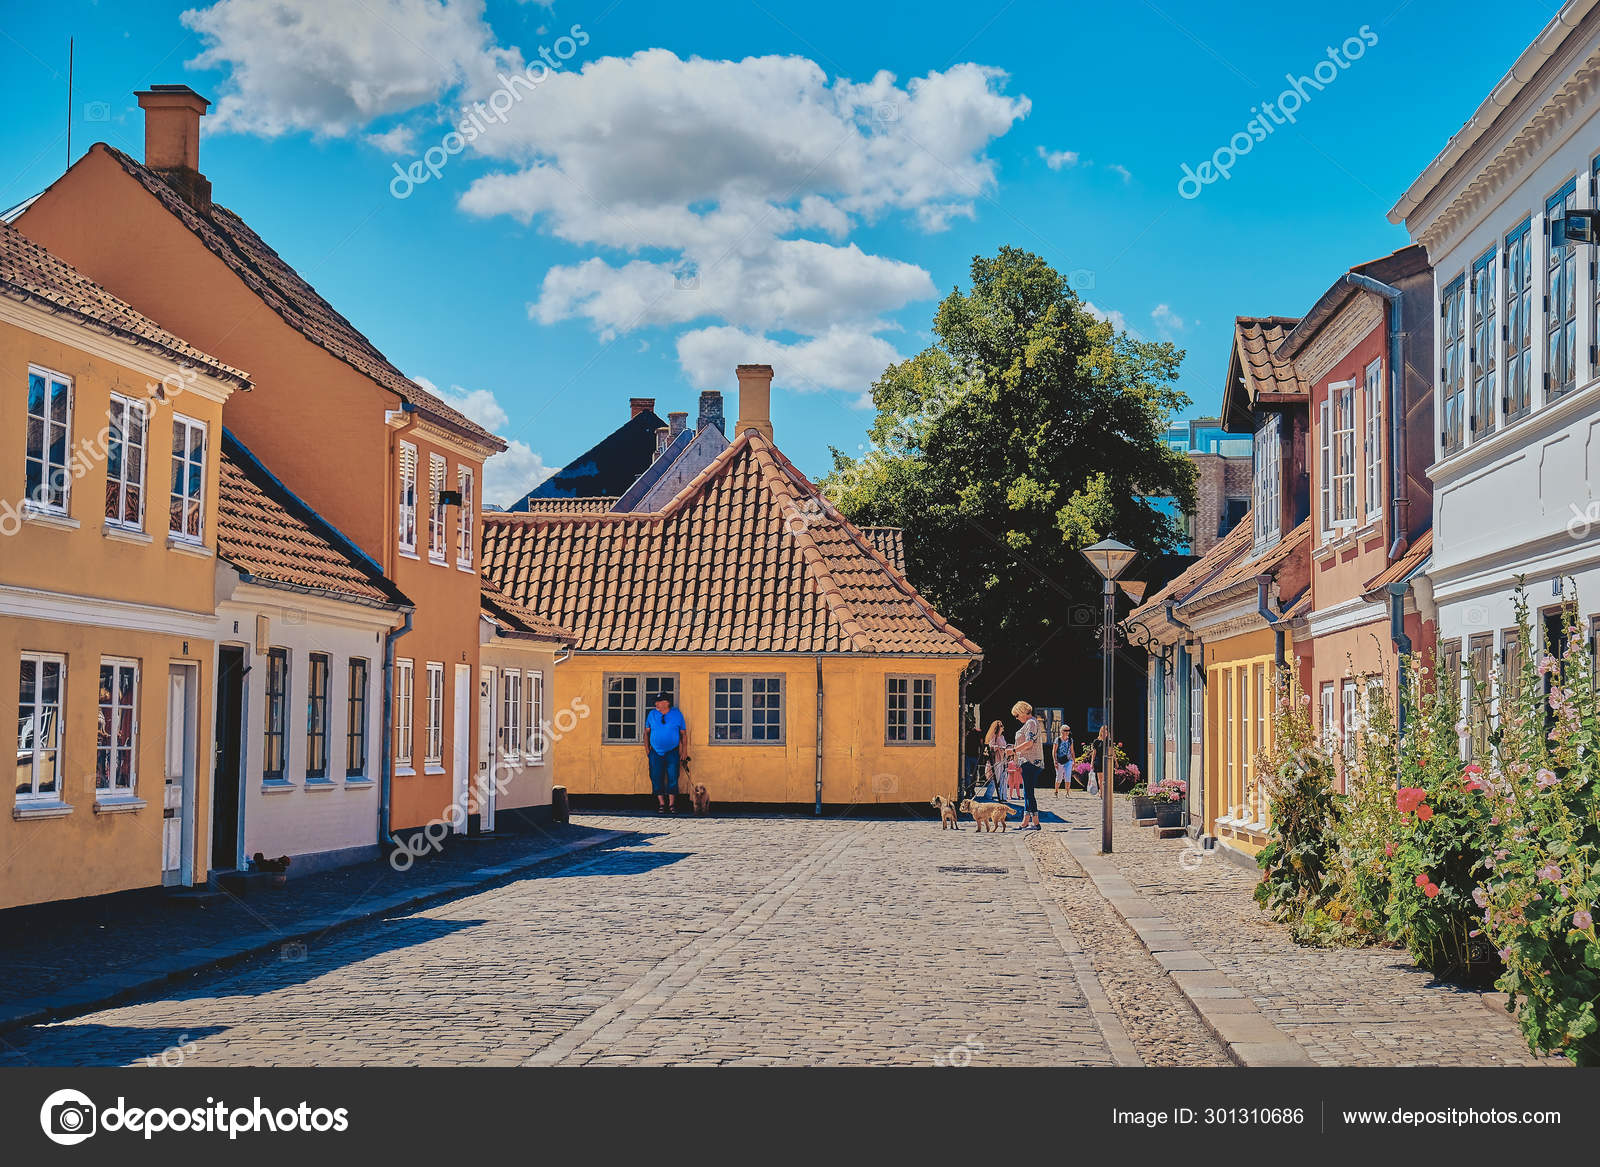 Beautiful Old Building In Odense Denmark Stock Photo By C Badahos